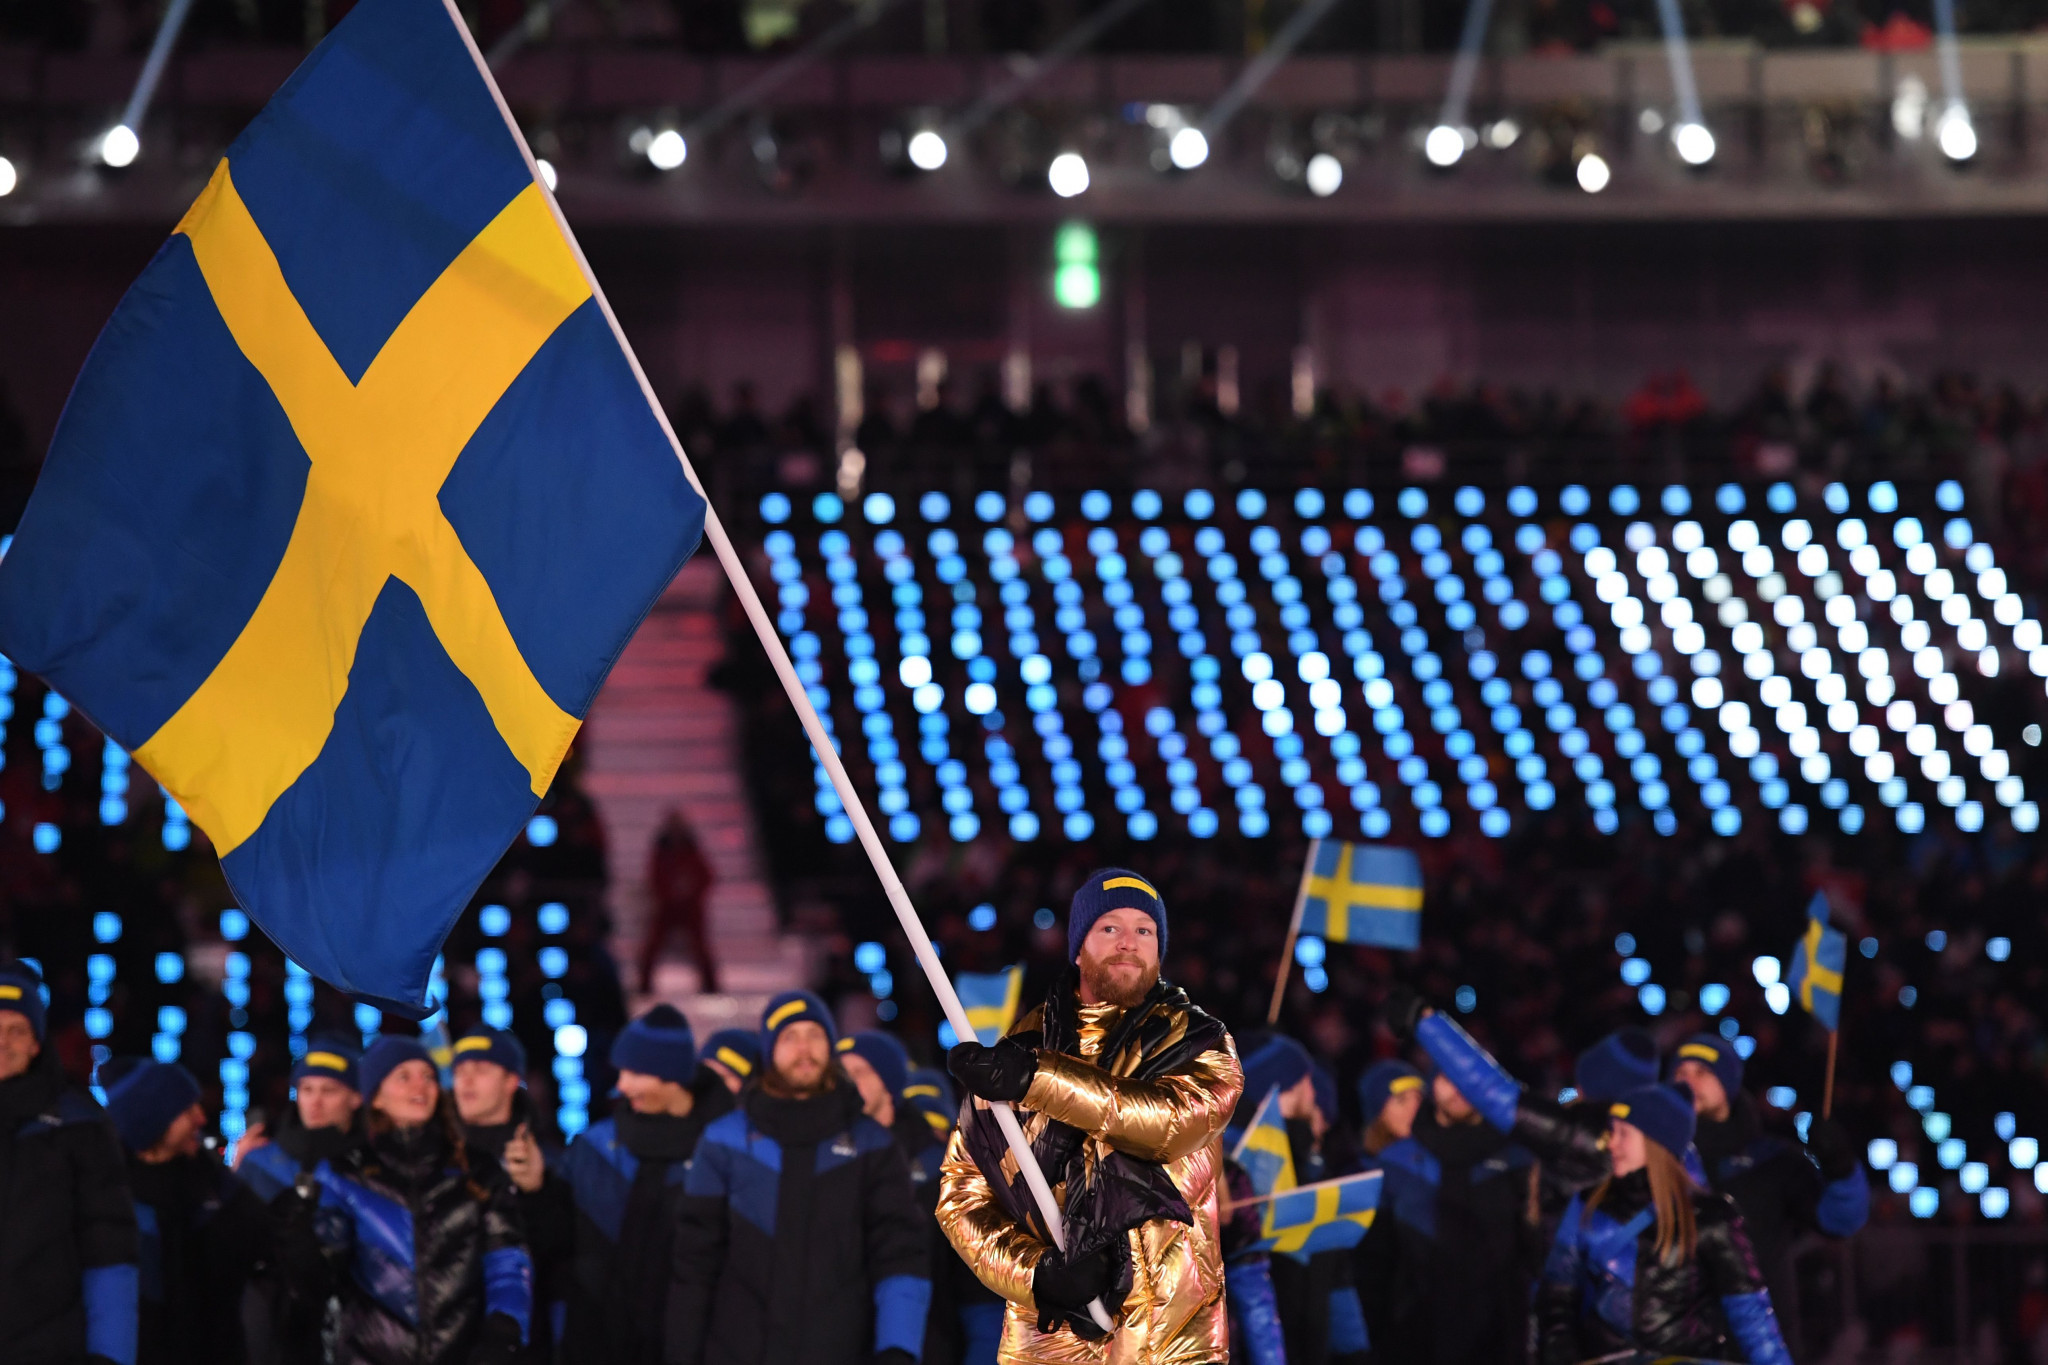 The Swedish Olympic Committee has collaborated with the Swedish Armed Forces prior to Beijing 2022 ©Getty Images